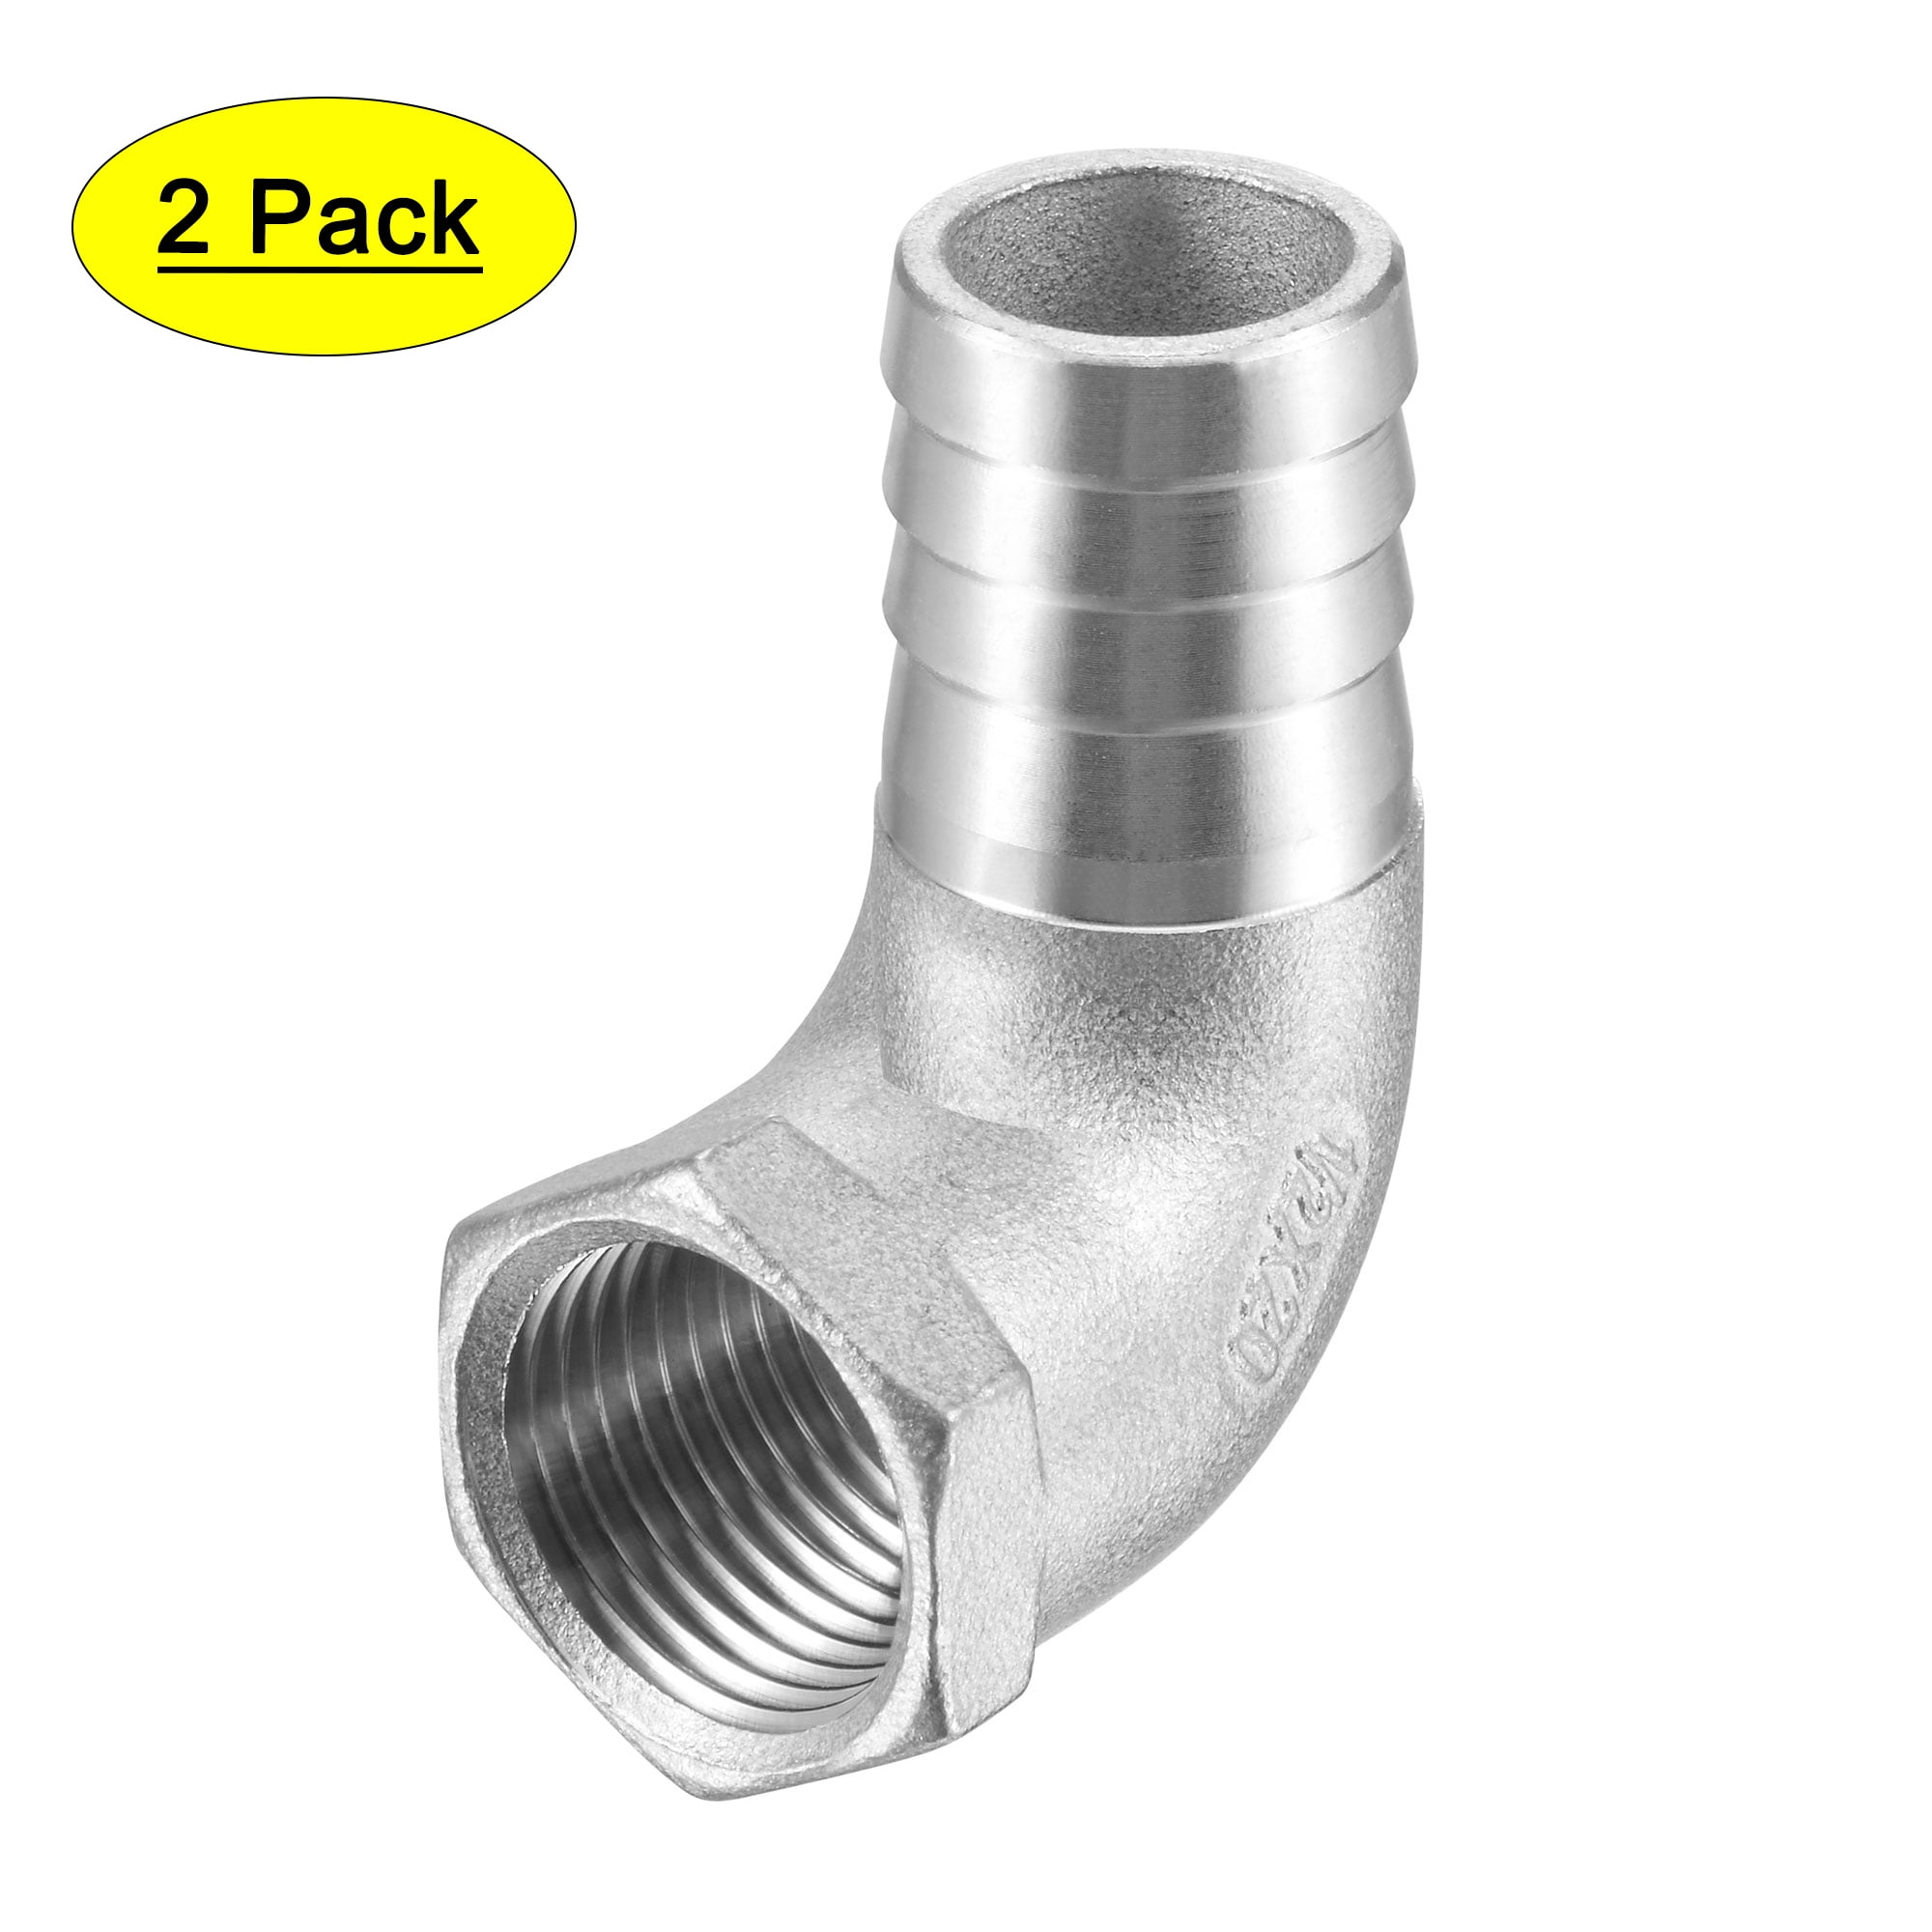 Pro Pipe Fitting Stainless Steel 304 NPT 3/4" Female x 3/4" Male Elbow Threaded 